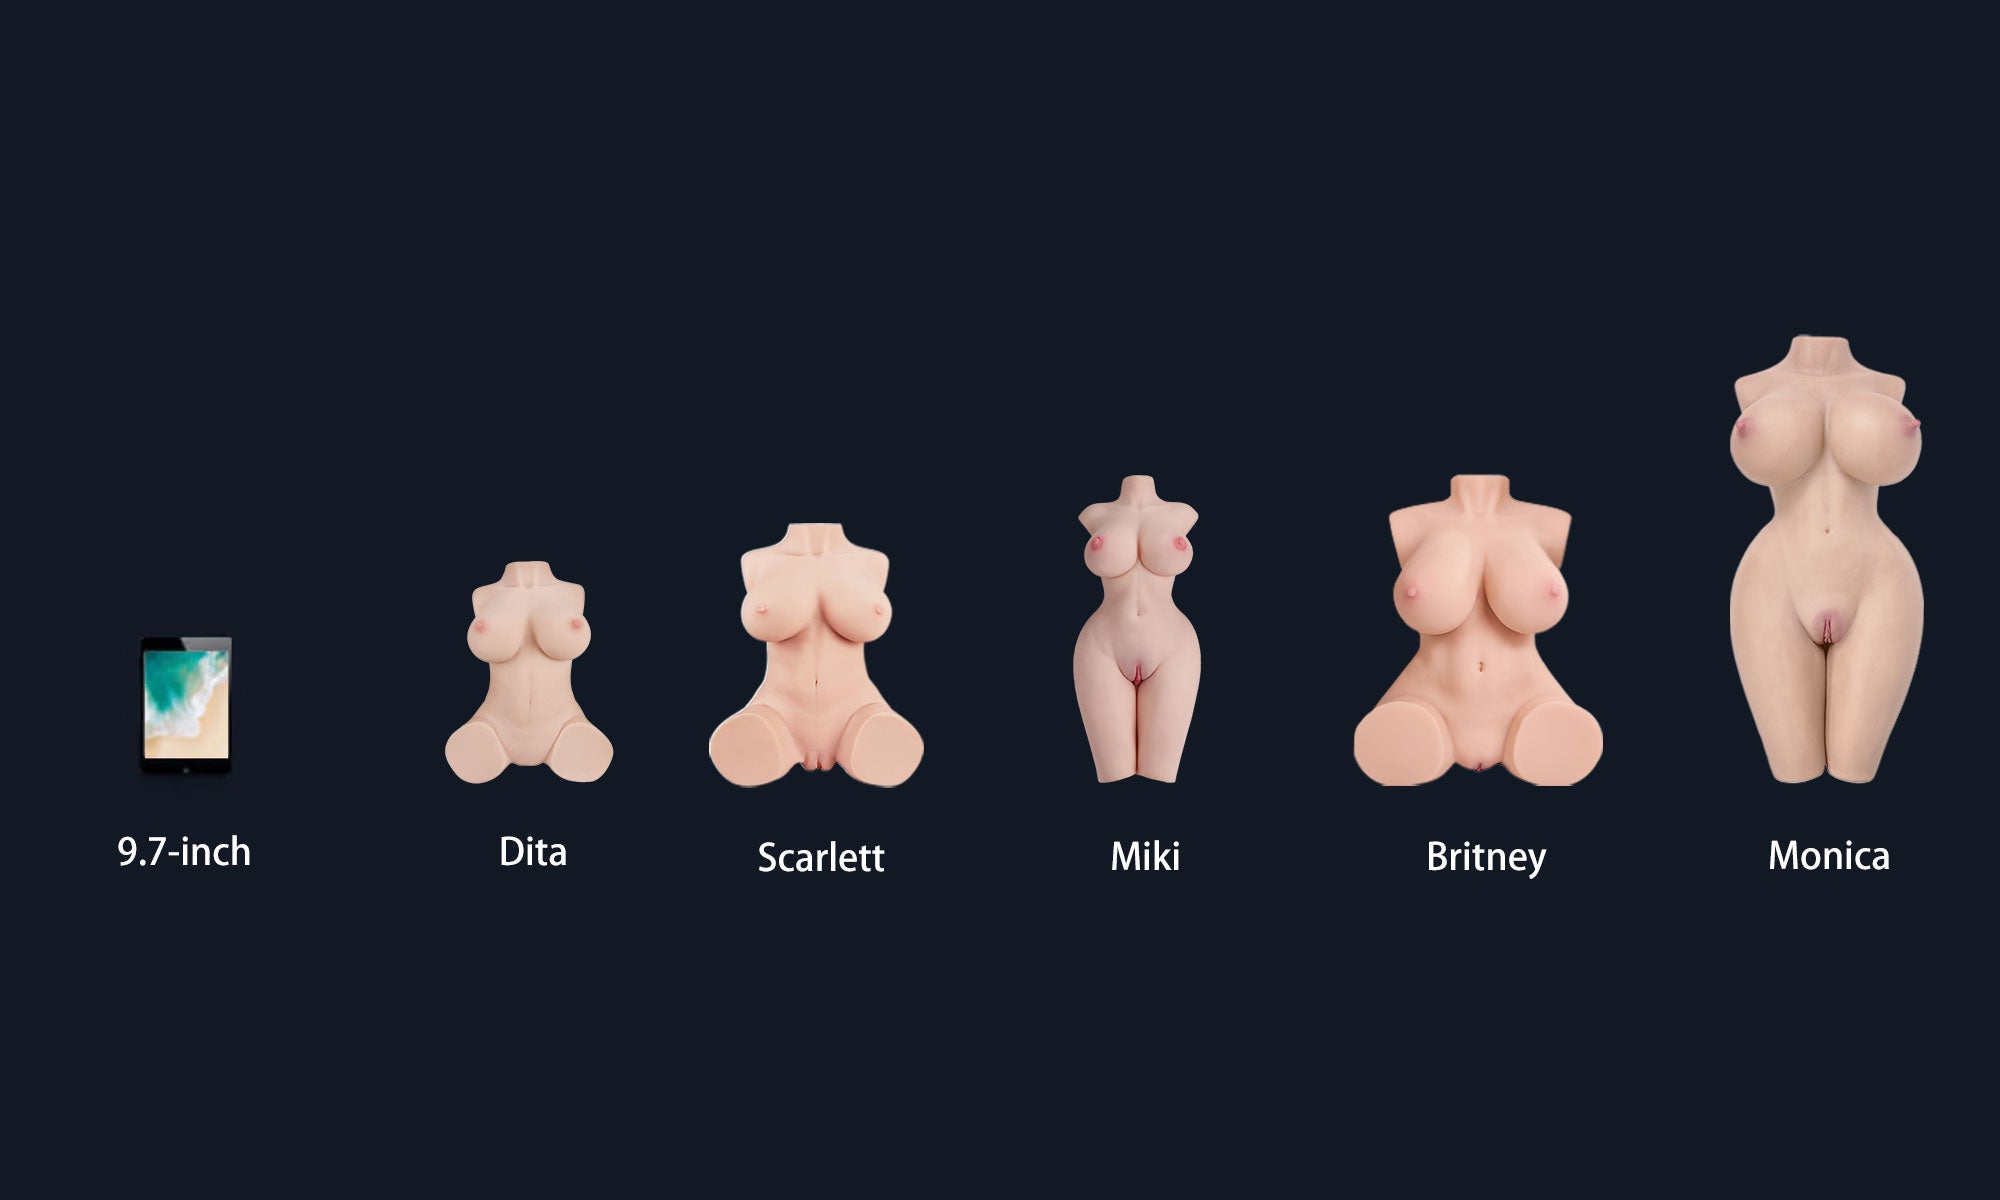 dita doll comparison with  other hot dolls.jpg__PID:0f45a2a6-cfd3-499c-9983-35baf8bd623e